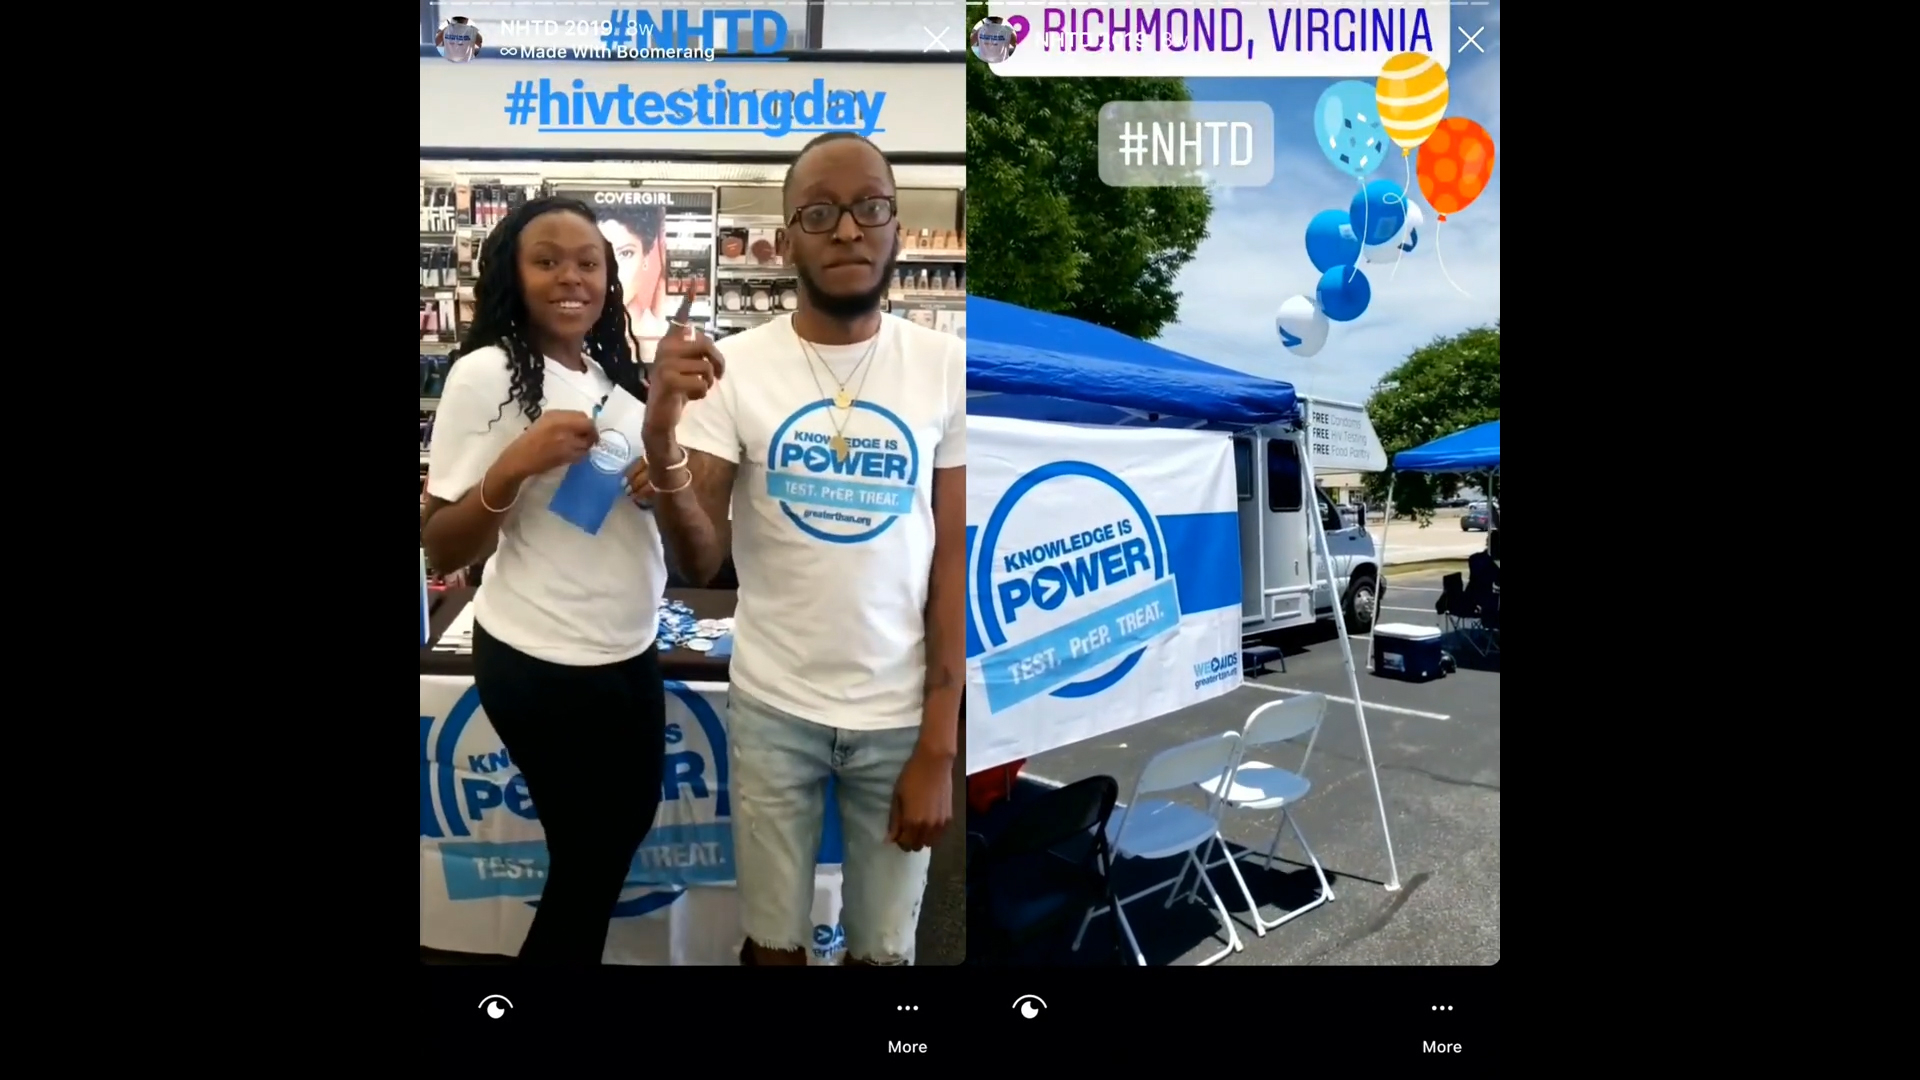 Walgreens and KFF’s Greater Than HIV Team Up with Community Partners to Provide Free, Confidential HIV Testing and Counseling on National HIV Testing Day (June 27)